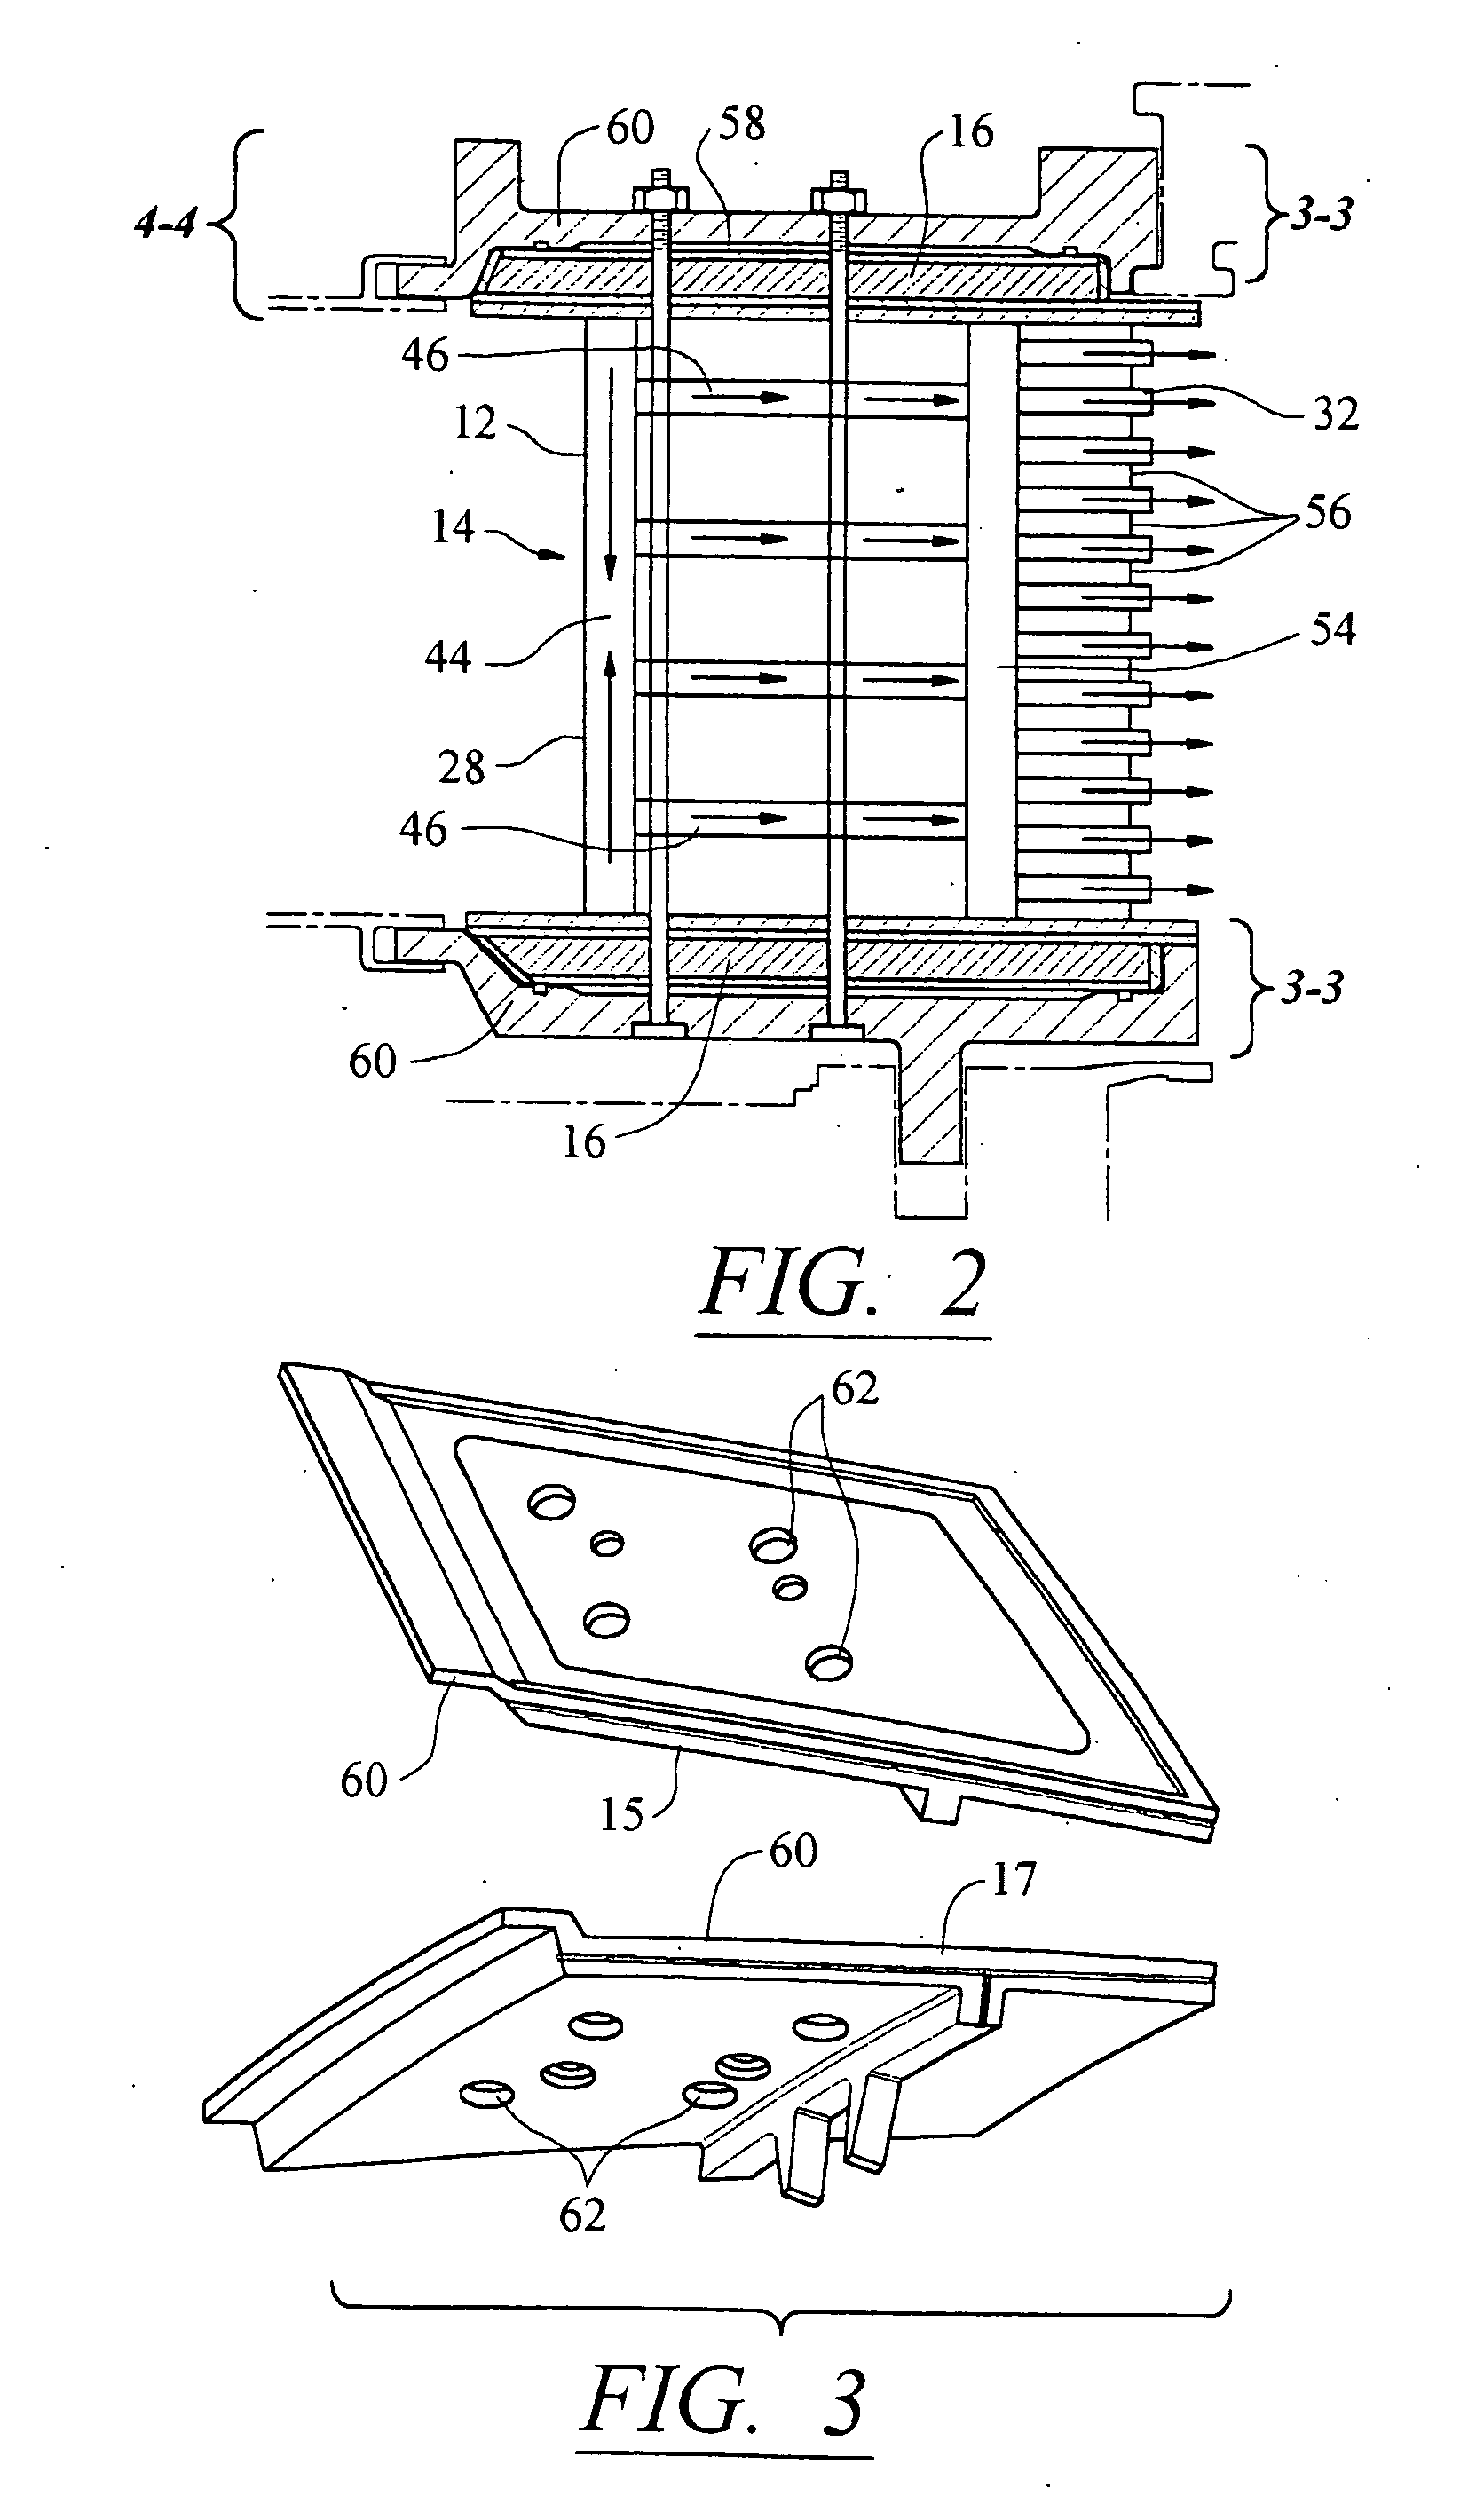 Cooling fluid preheating system for an airfoil in a turbine engine